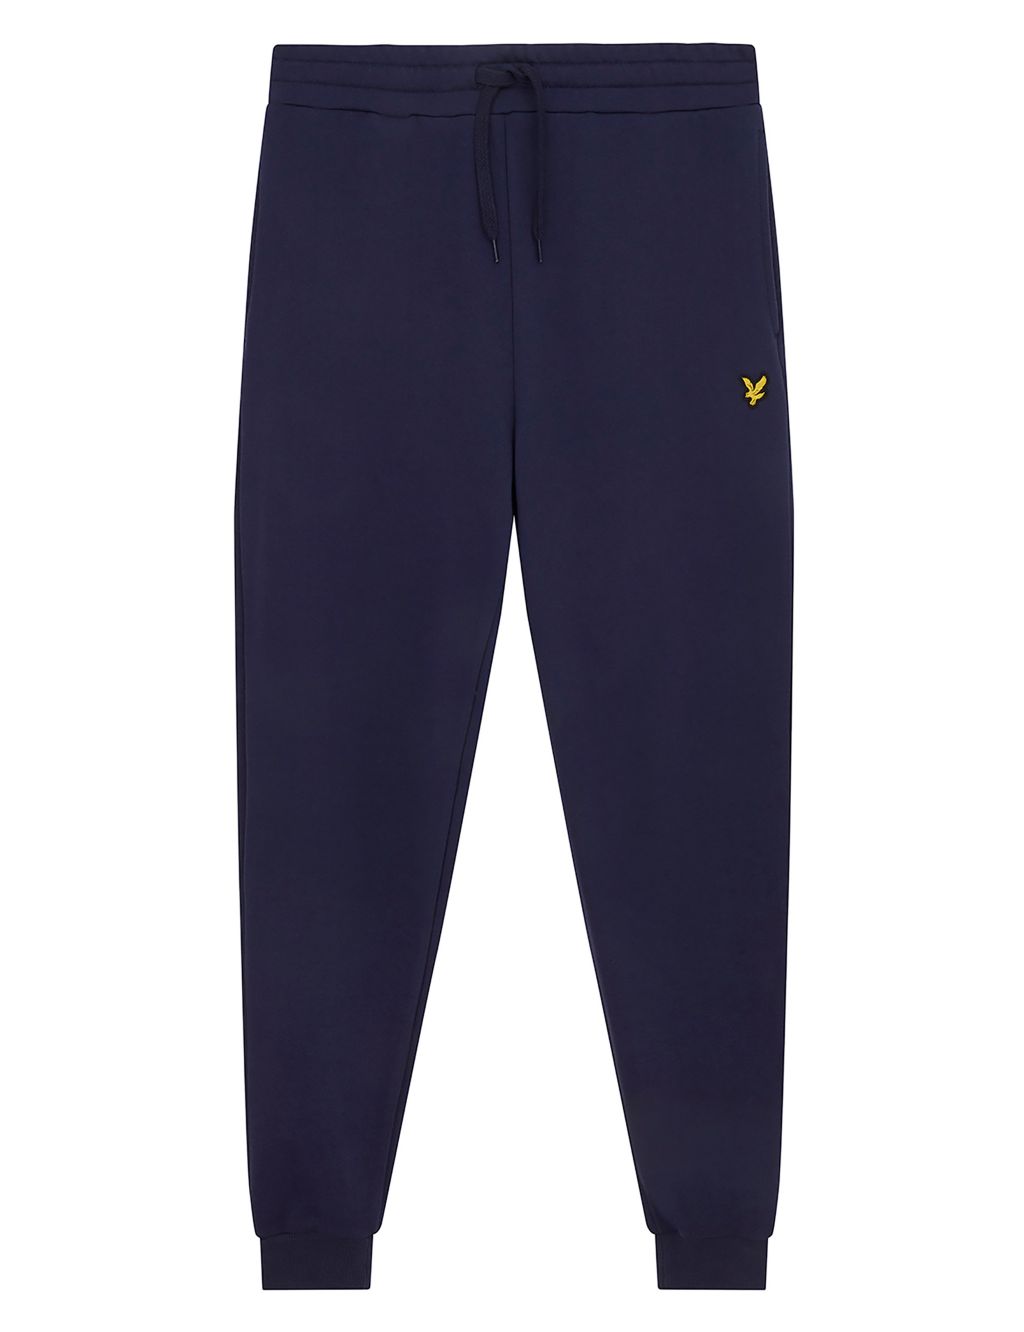 Regular Fit Pure Cotton Joggers image 2